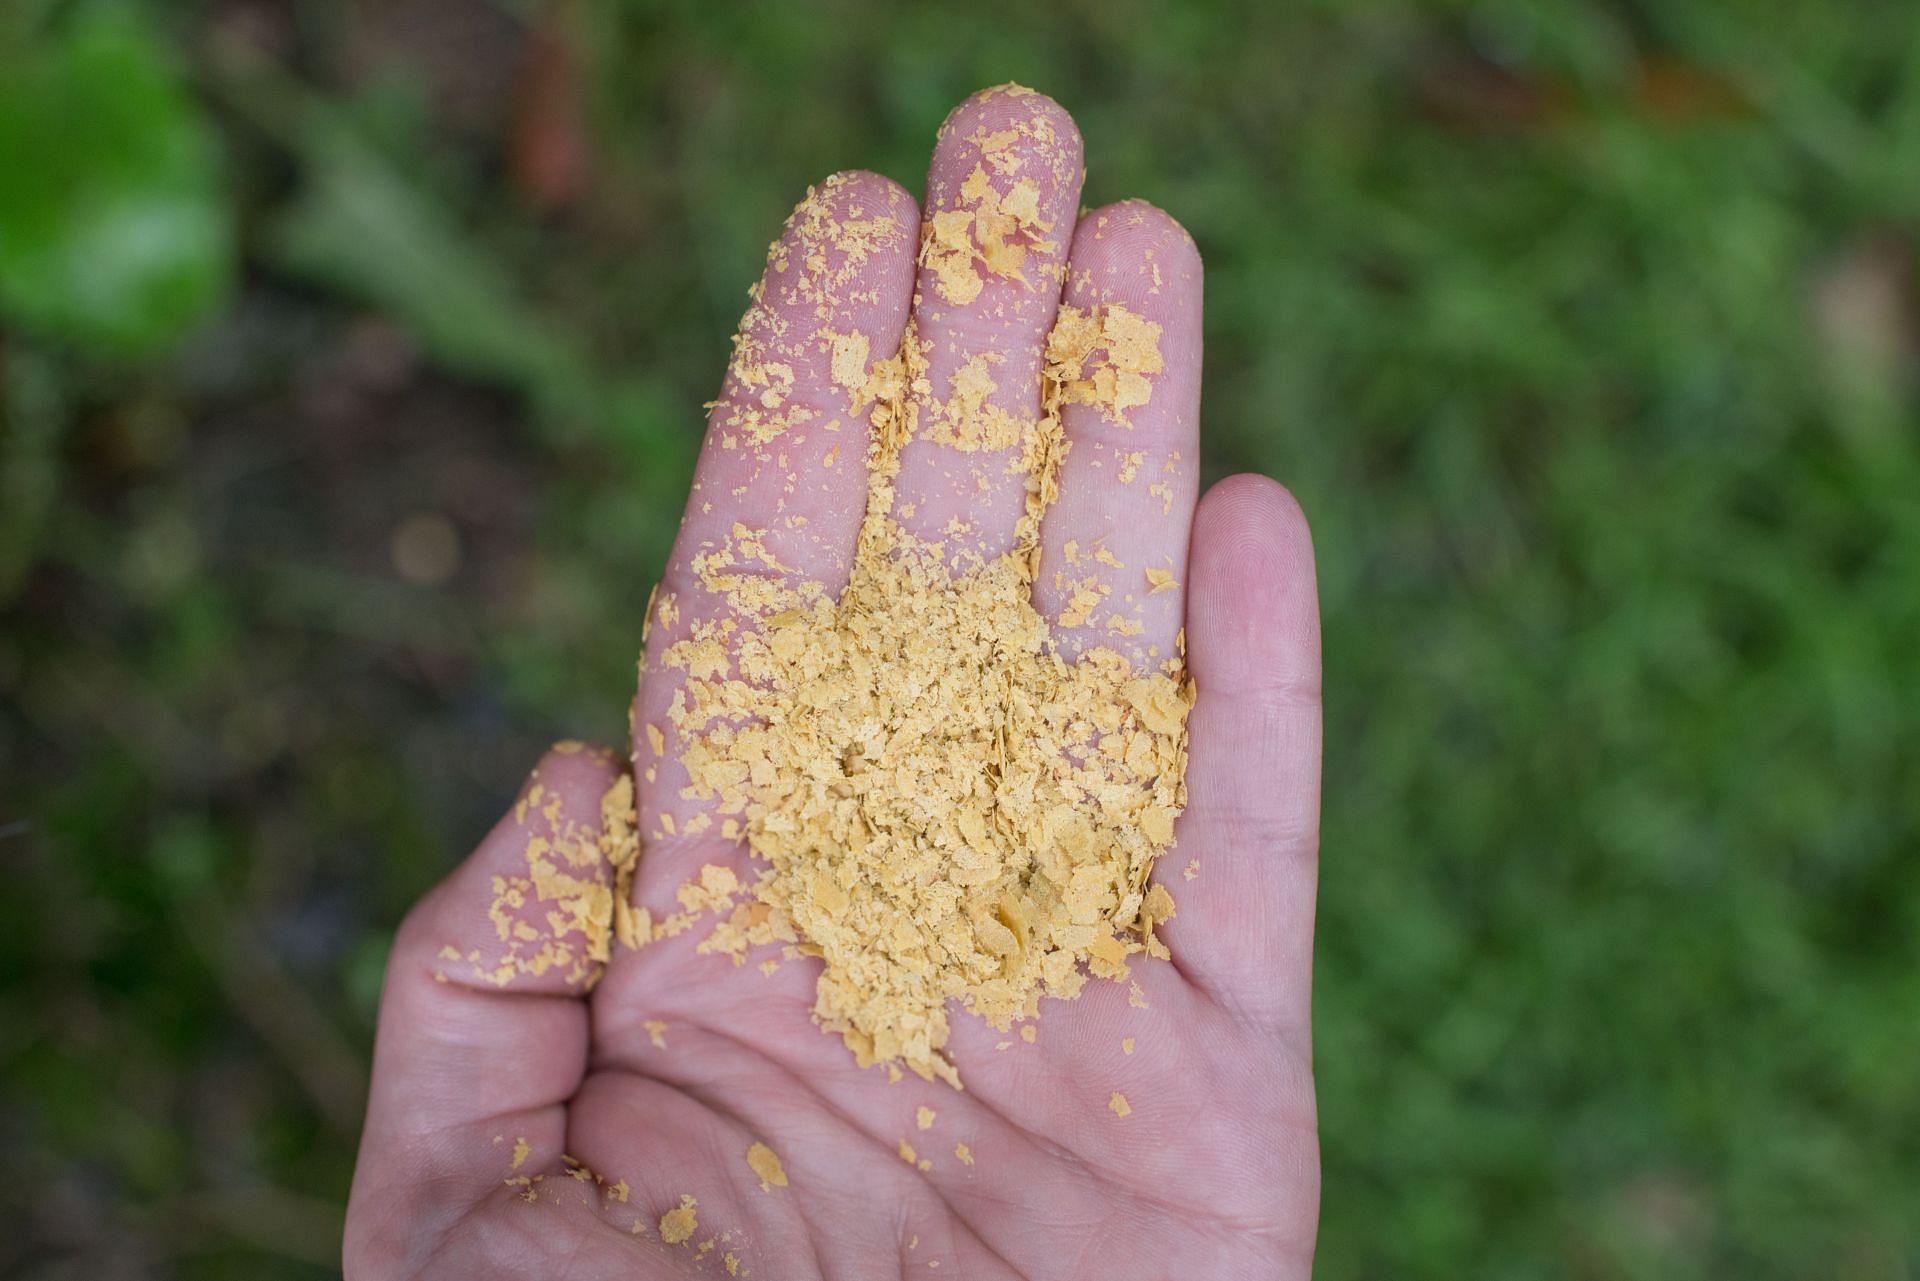 Nutritional yeast is a great source of high quality protein and B vitamins for vegans (Image via Flickr)